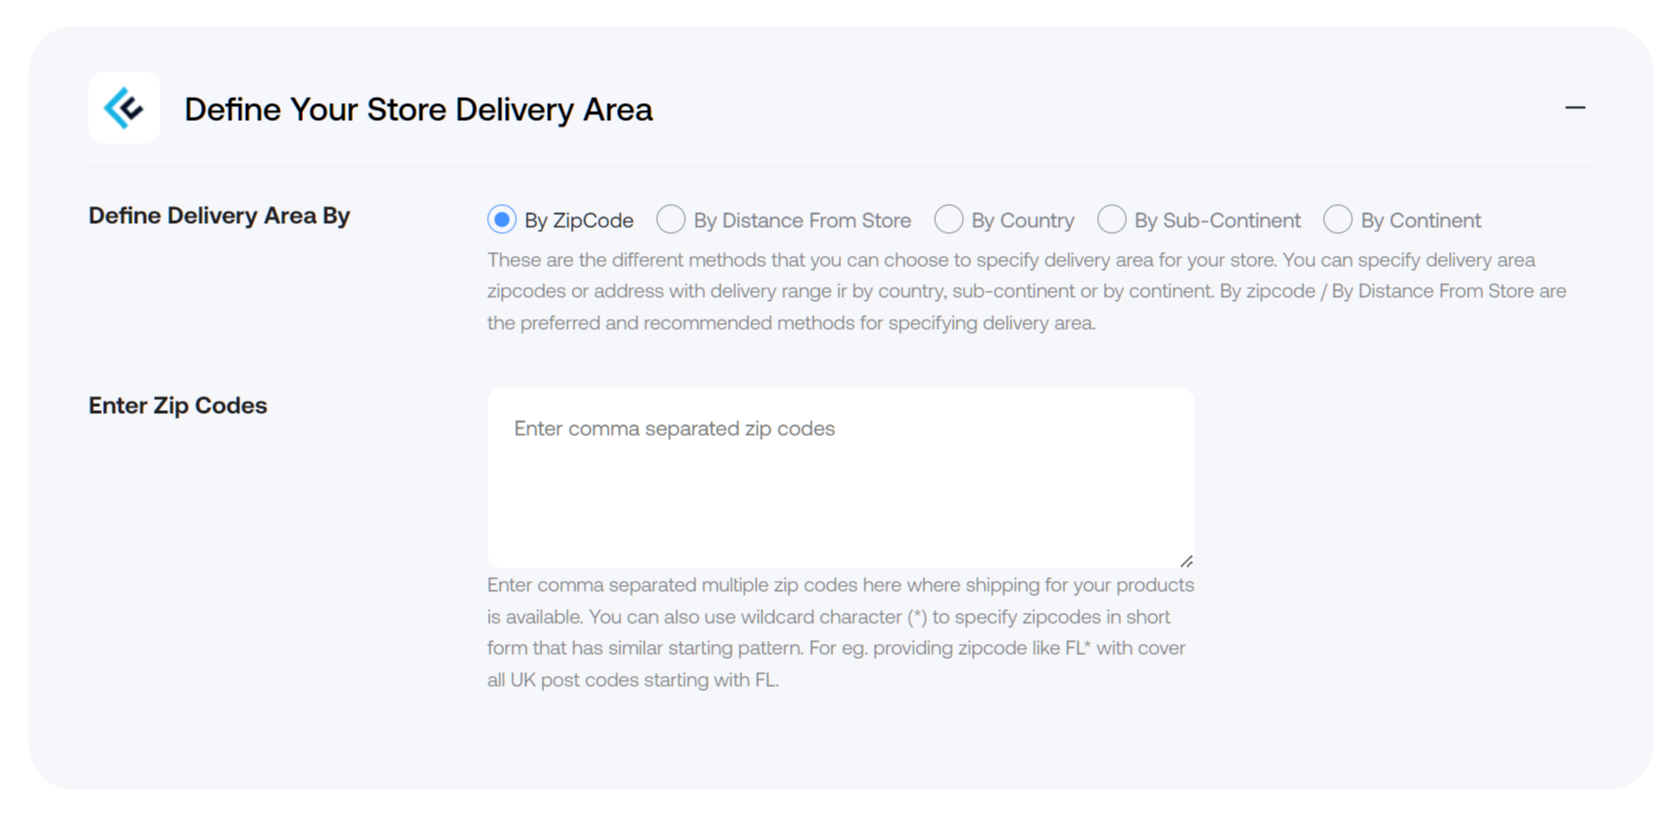 Define Your Store Delivery Area by Zipcode